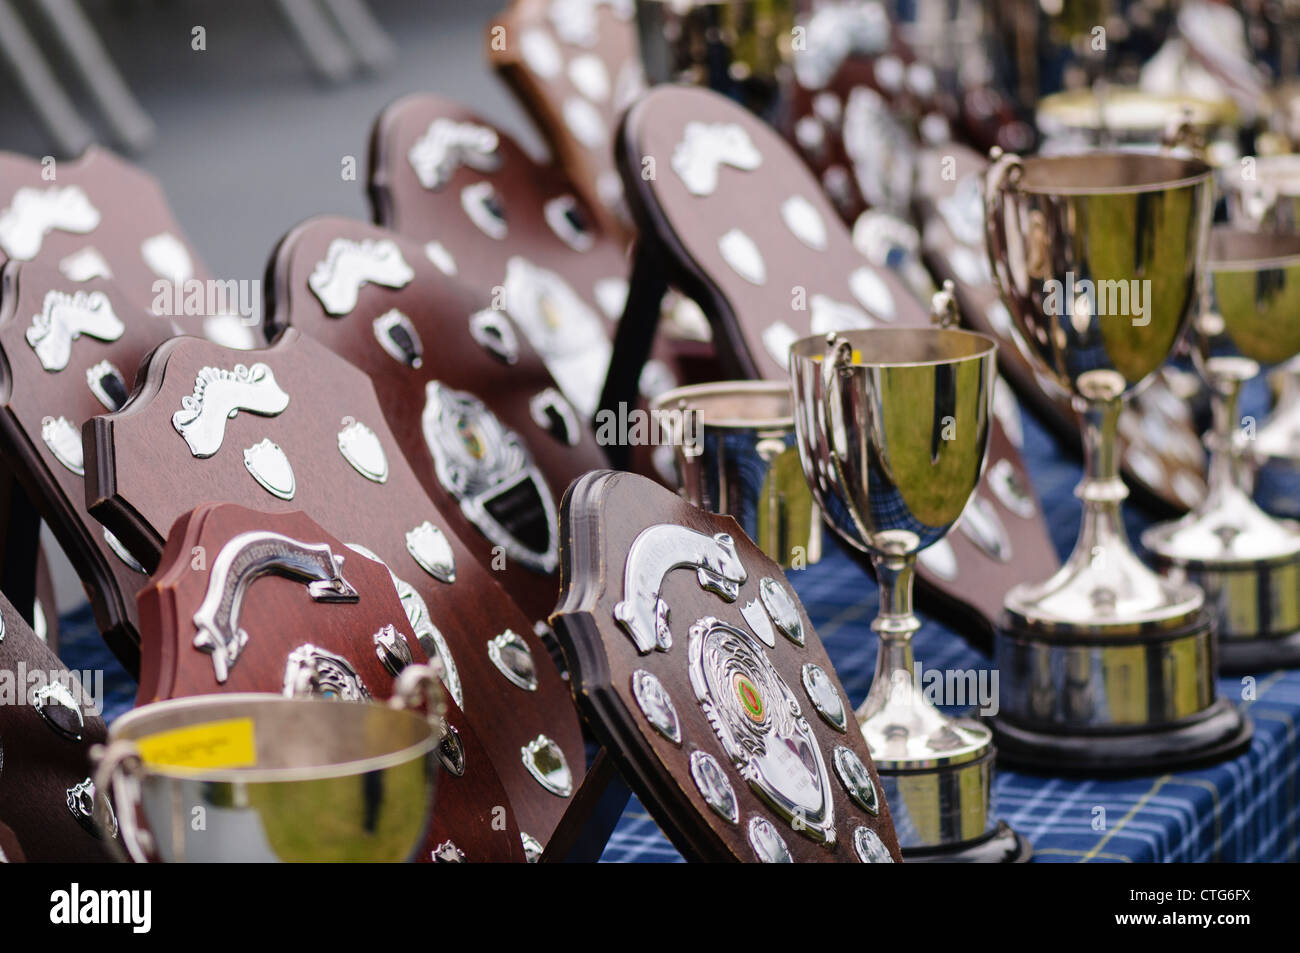 Table covered in trophies and awards including wooden plaques and silver cups Stock Photo